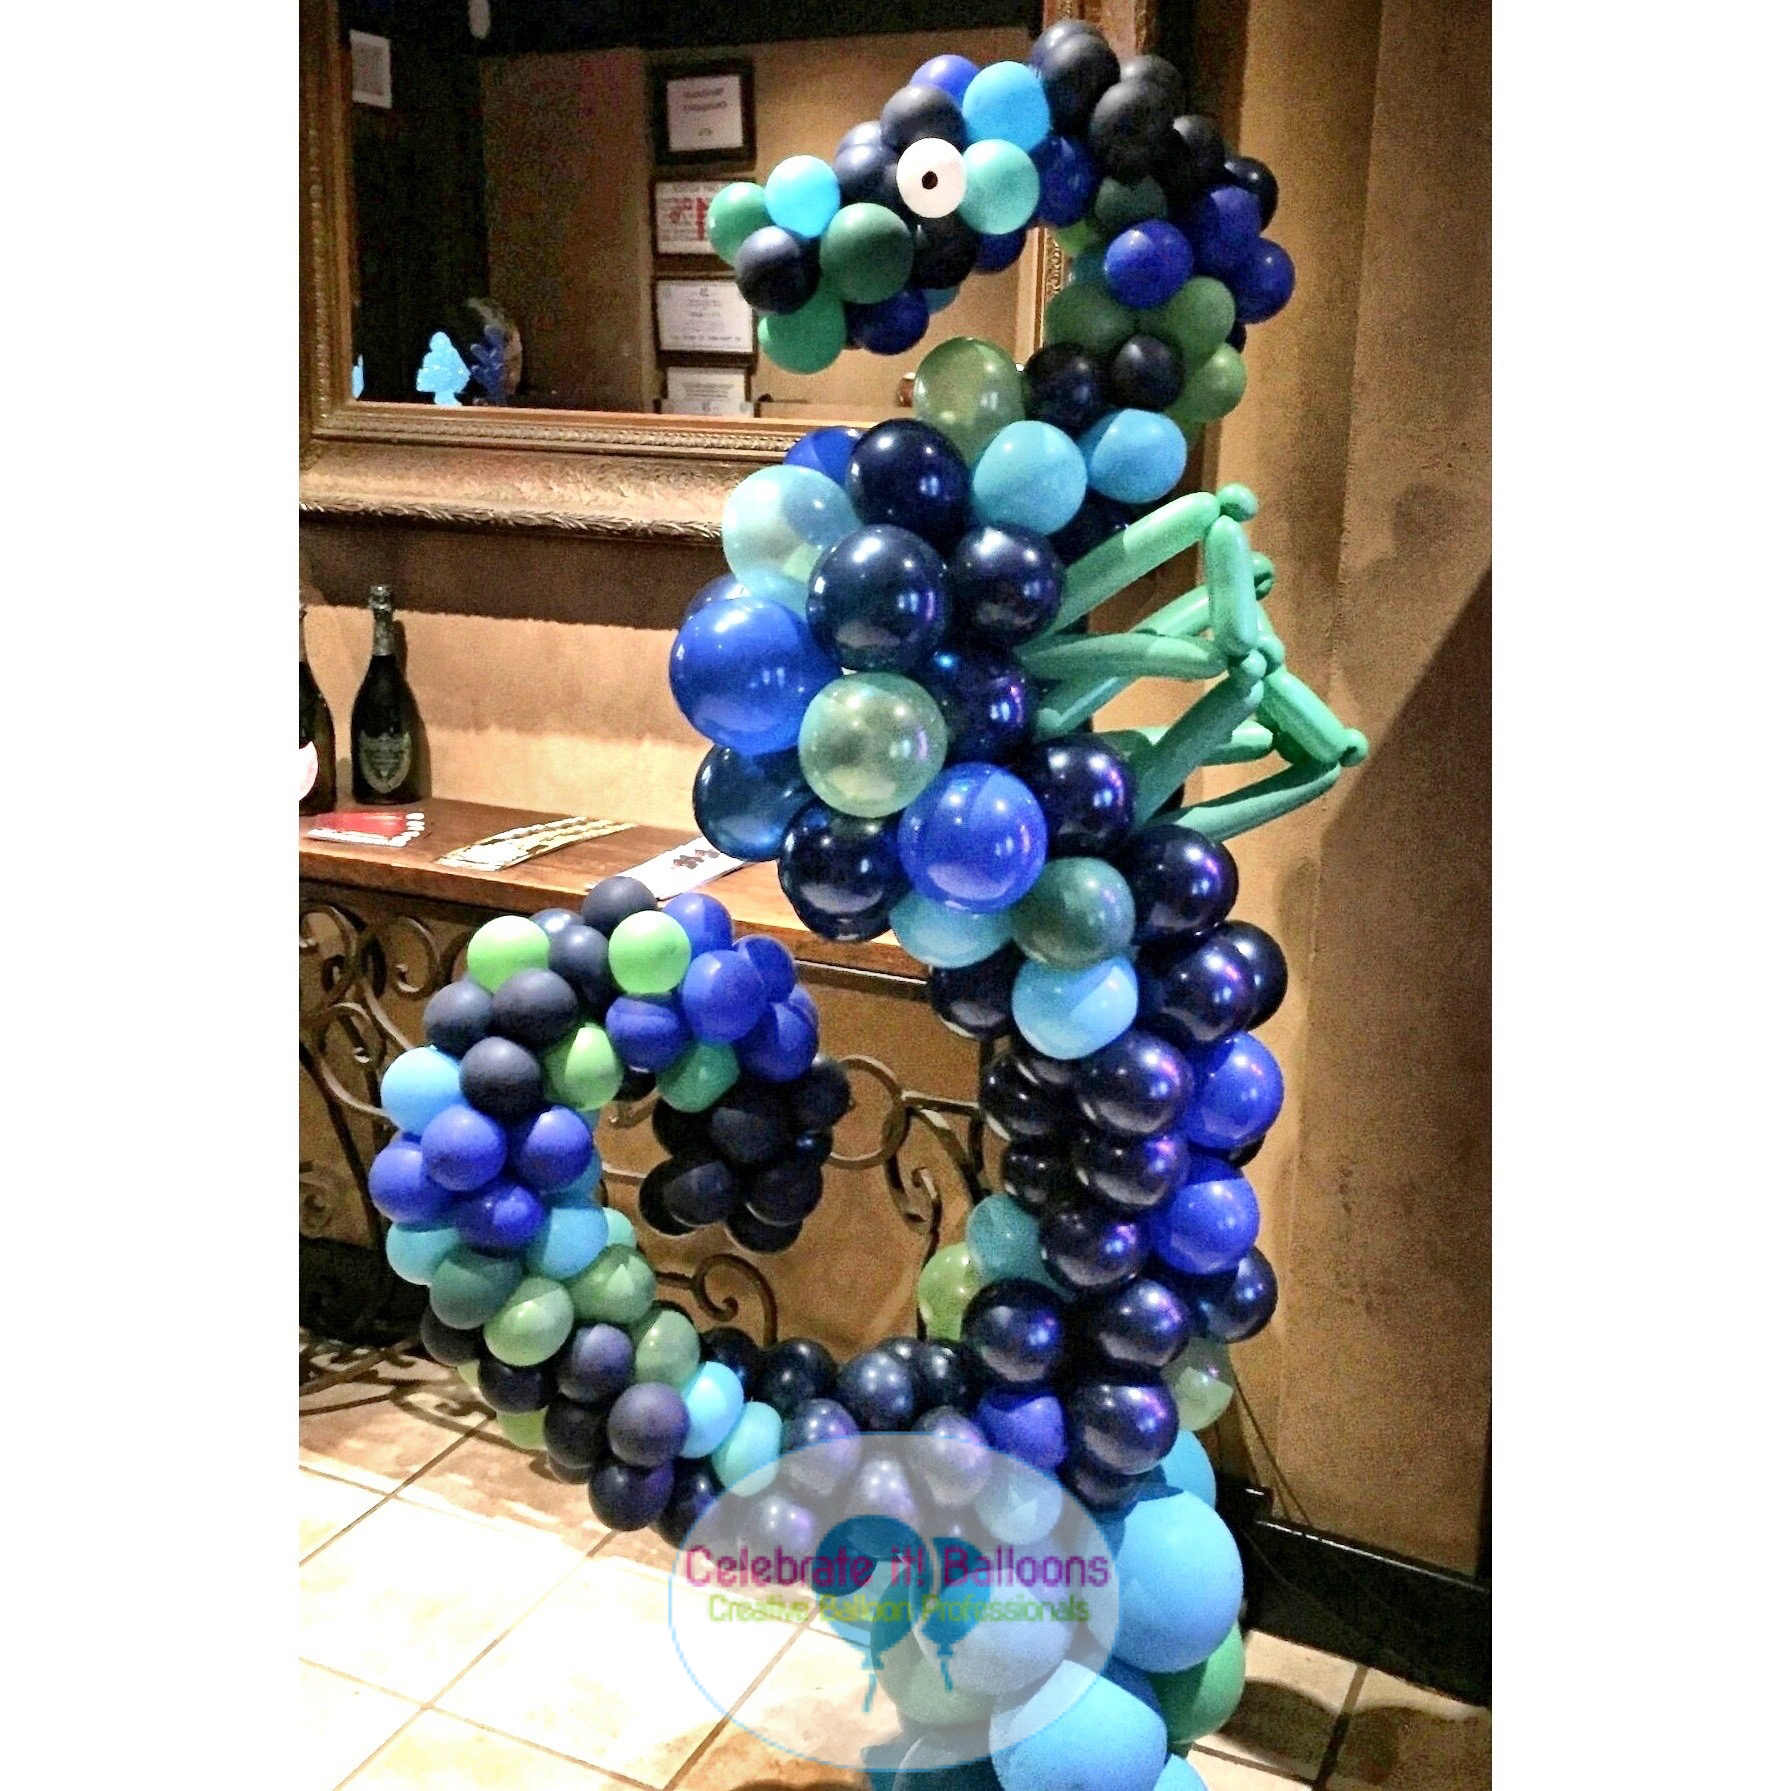 Seahorse built with balloons in shades of blue and green